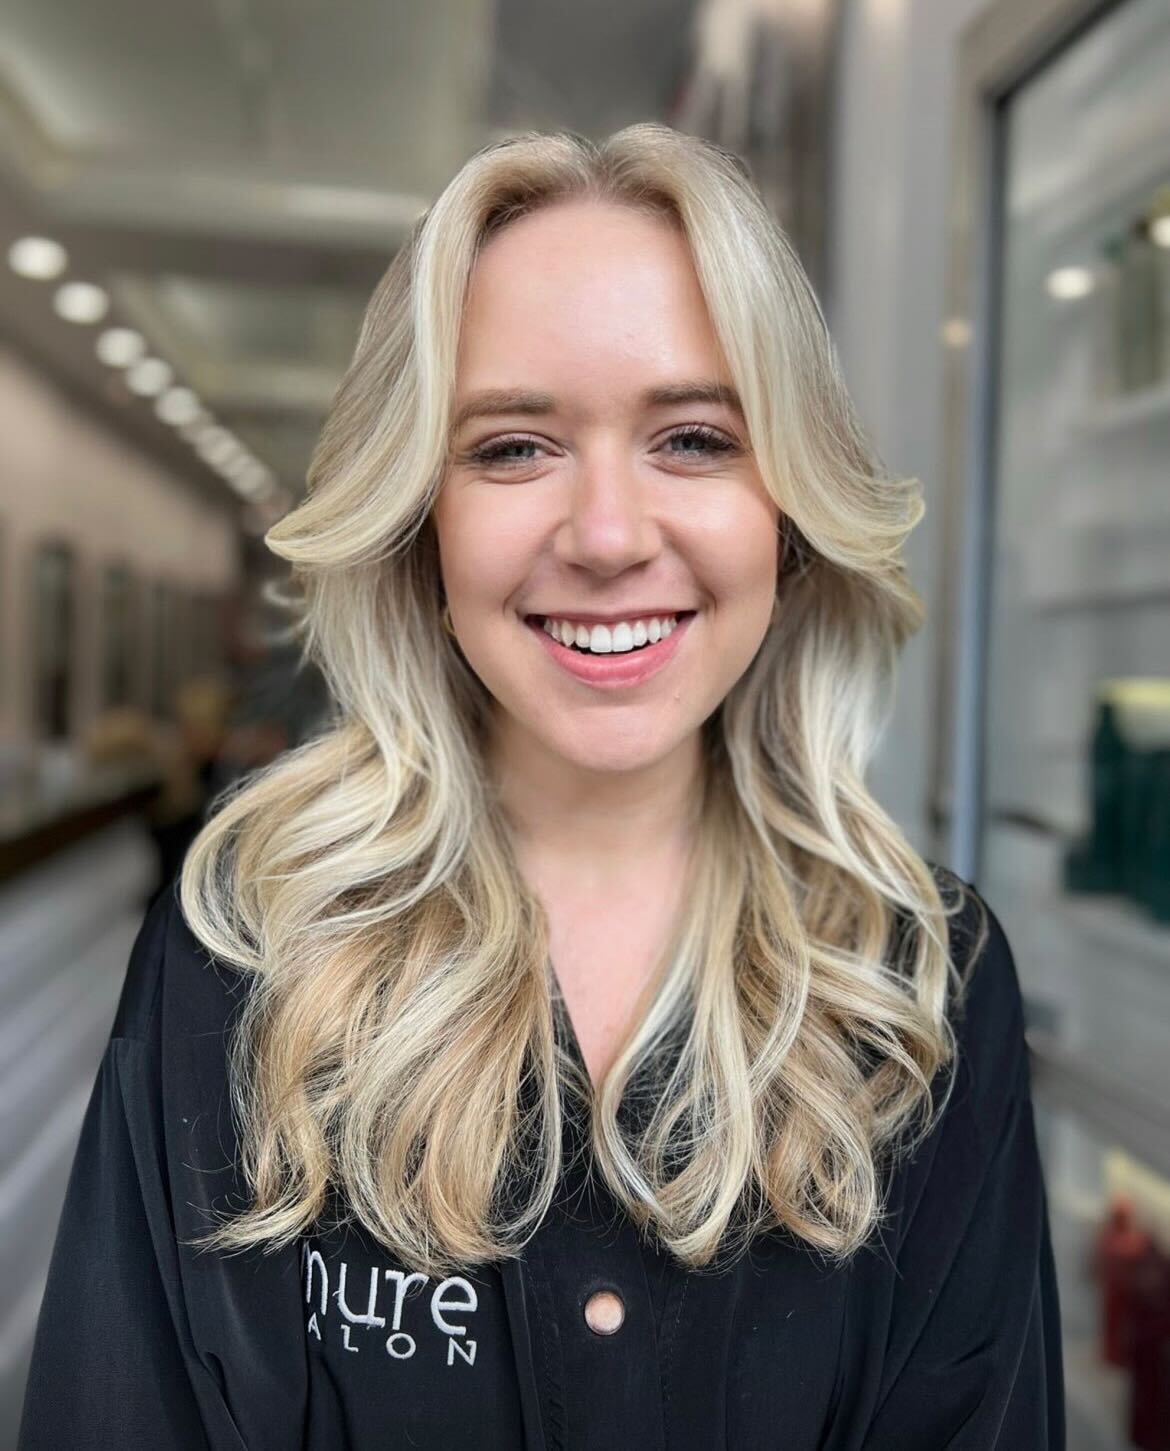 Client experiencing the luxury of personalized blonde balayage at Mure Salon